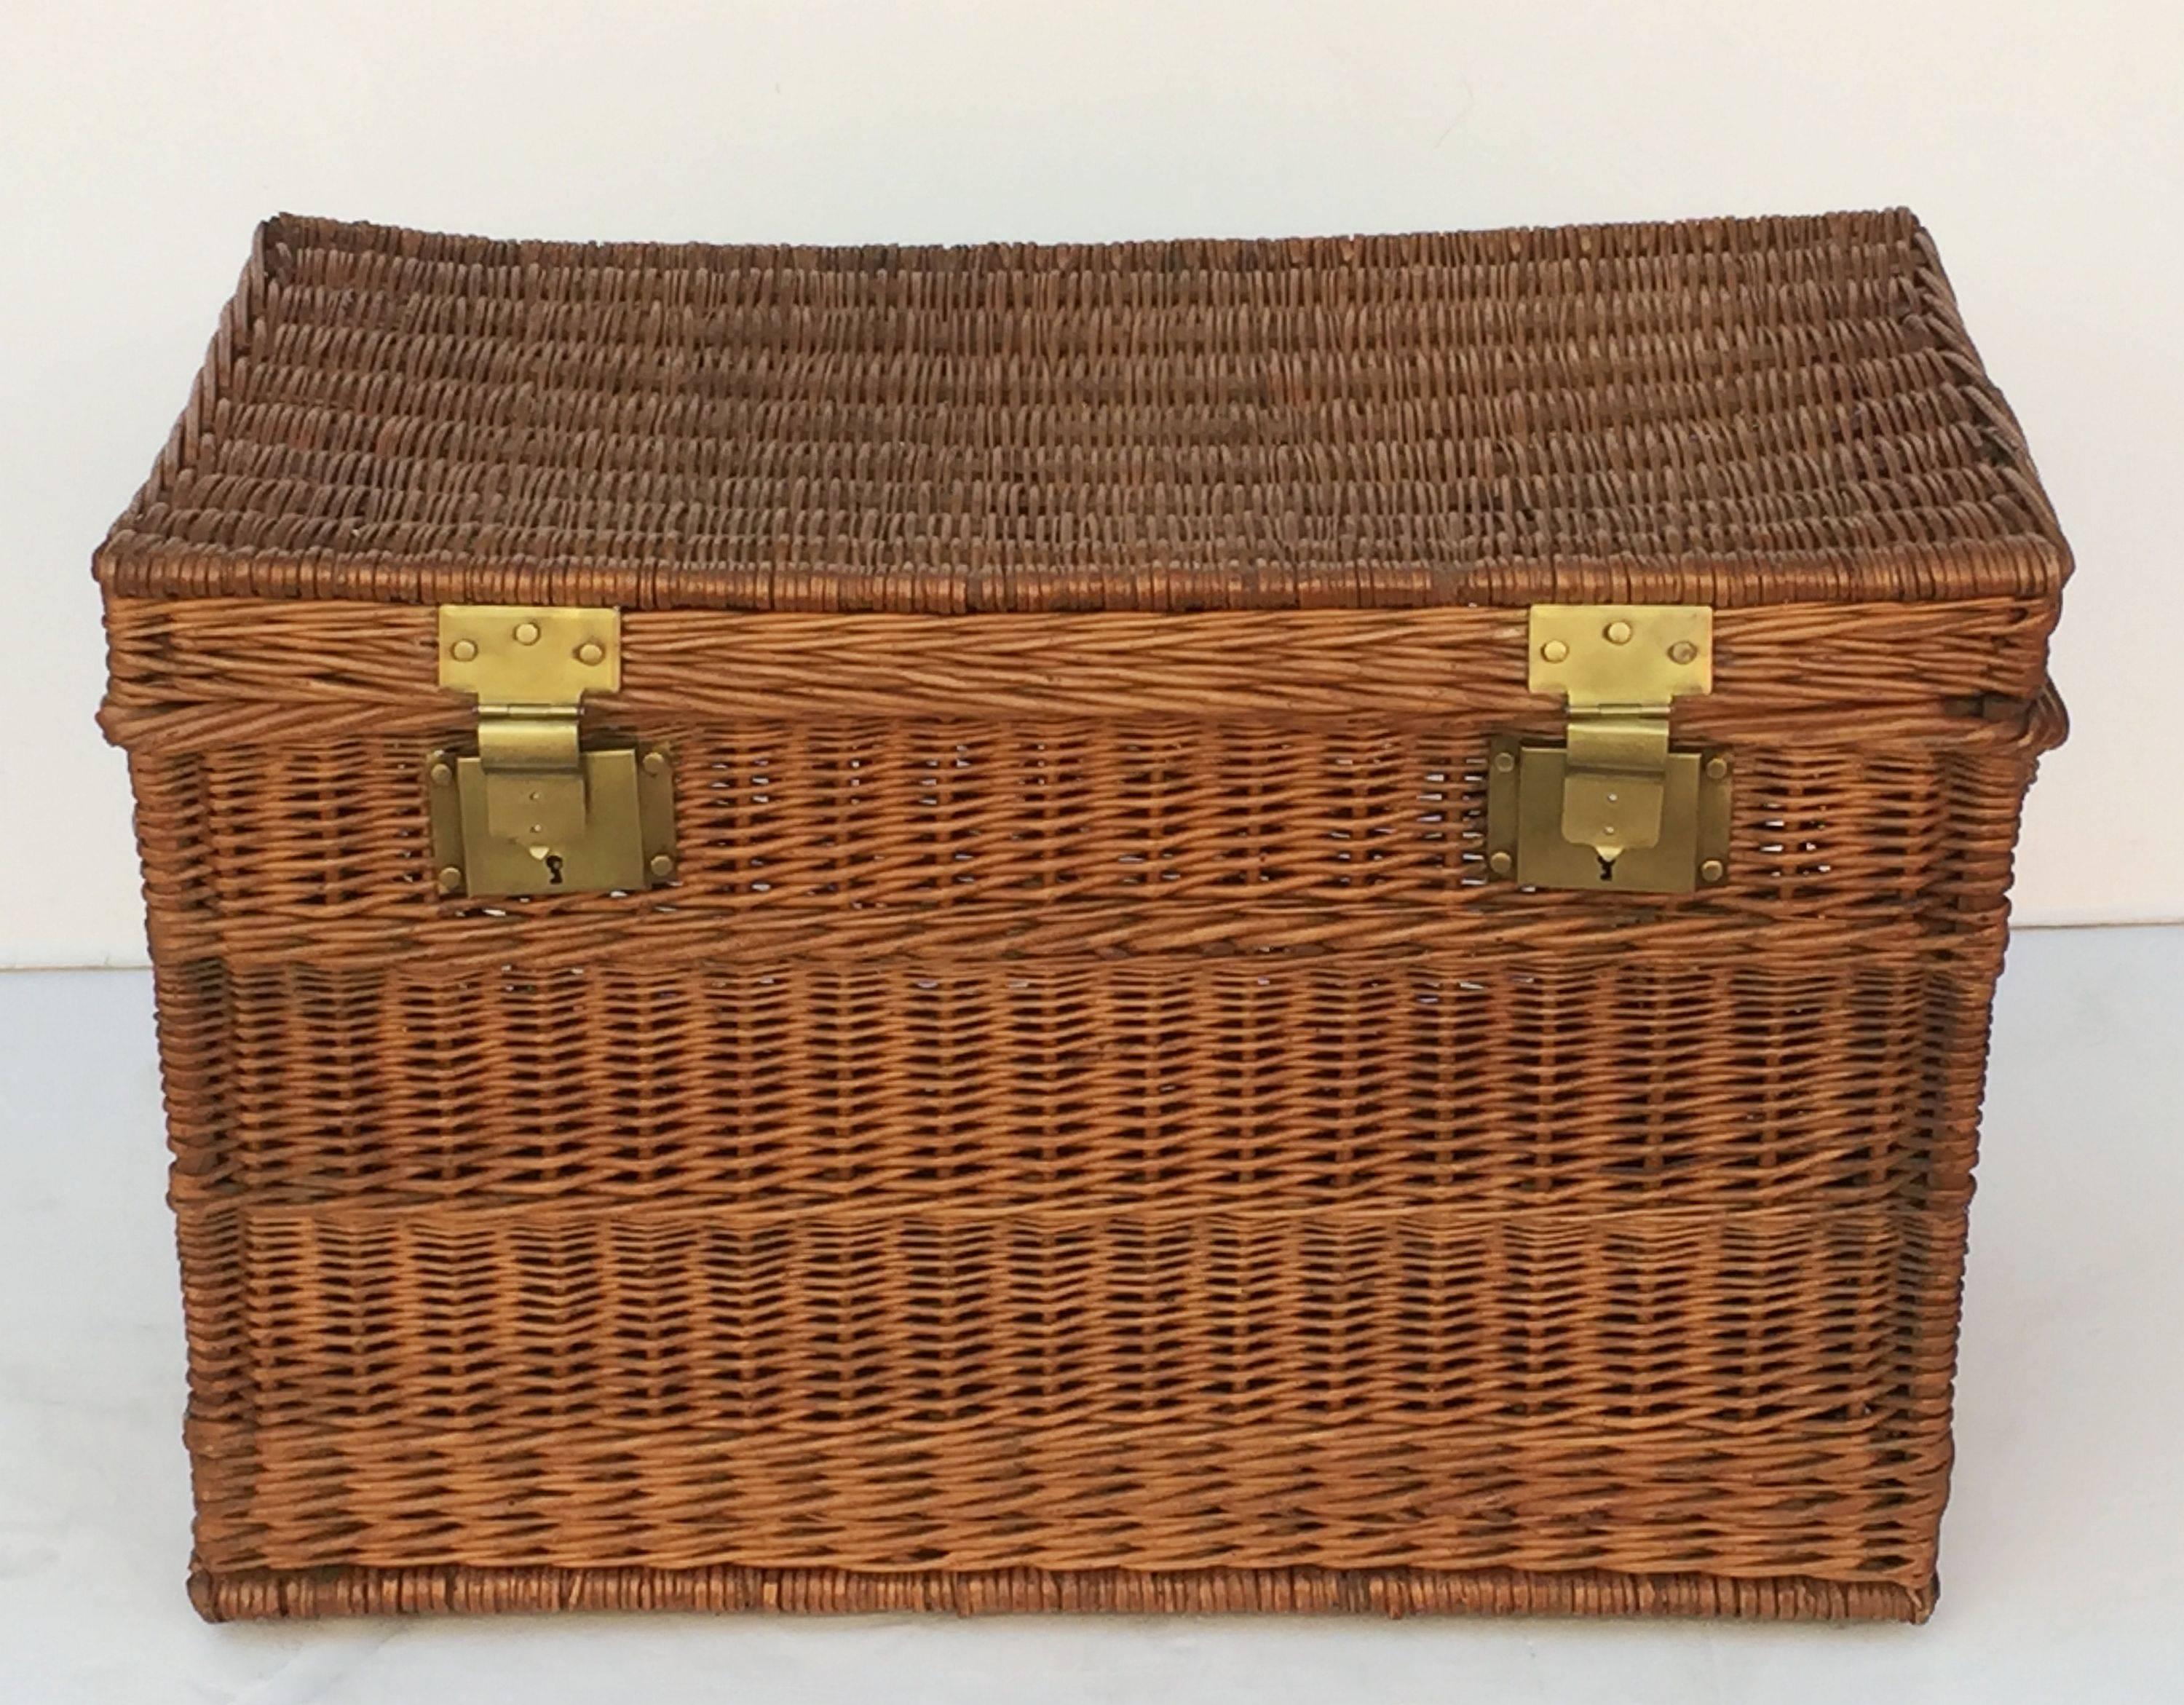 A large French basket hamper of woven willow with brass hardware and handles on each side. With wooden runners on underside.

Several available in this style, slight variations of size, please enquire.

Note: Latches do not always close and